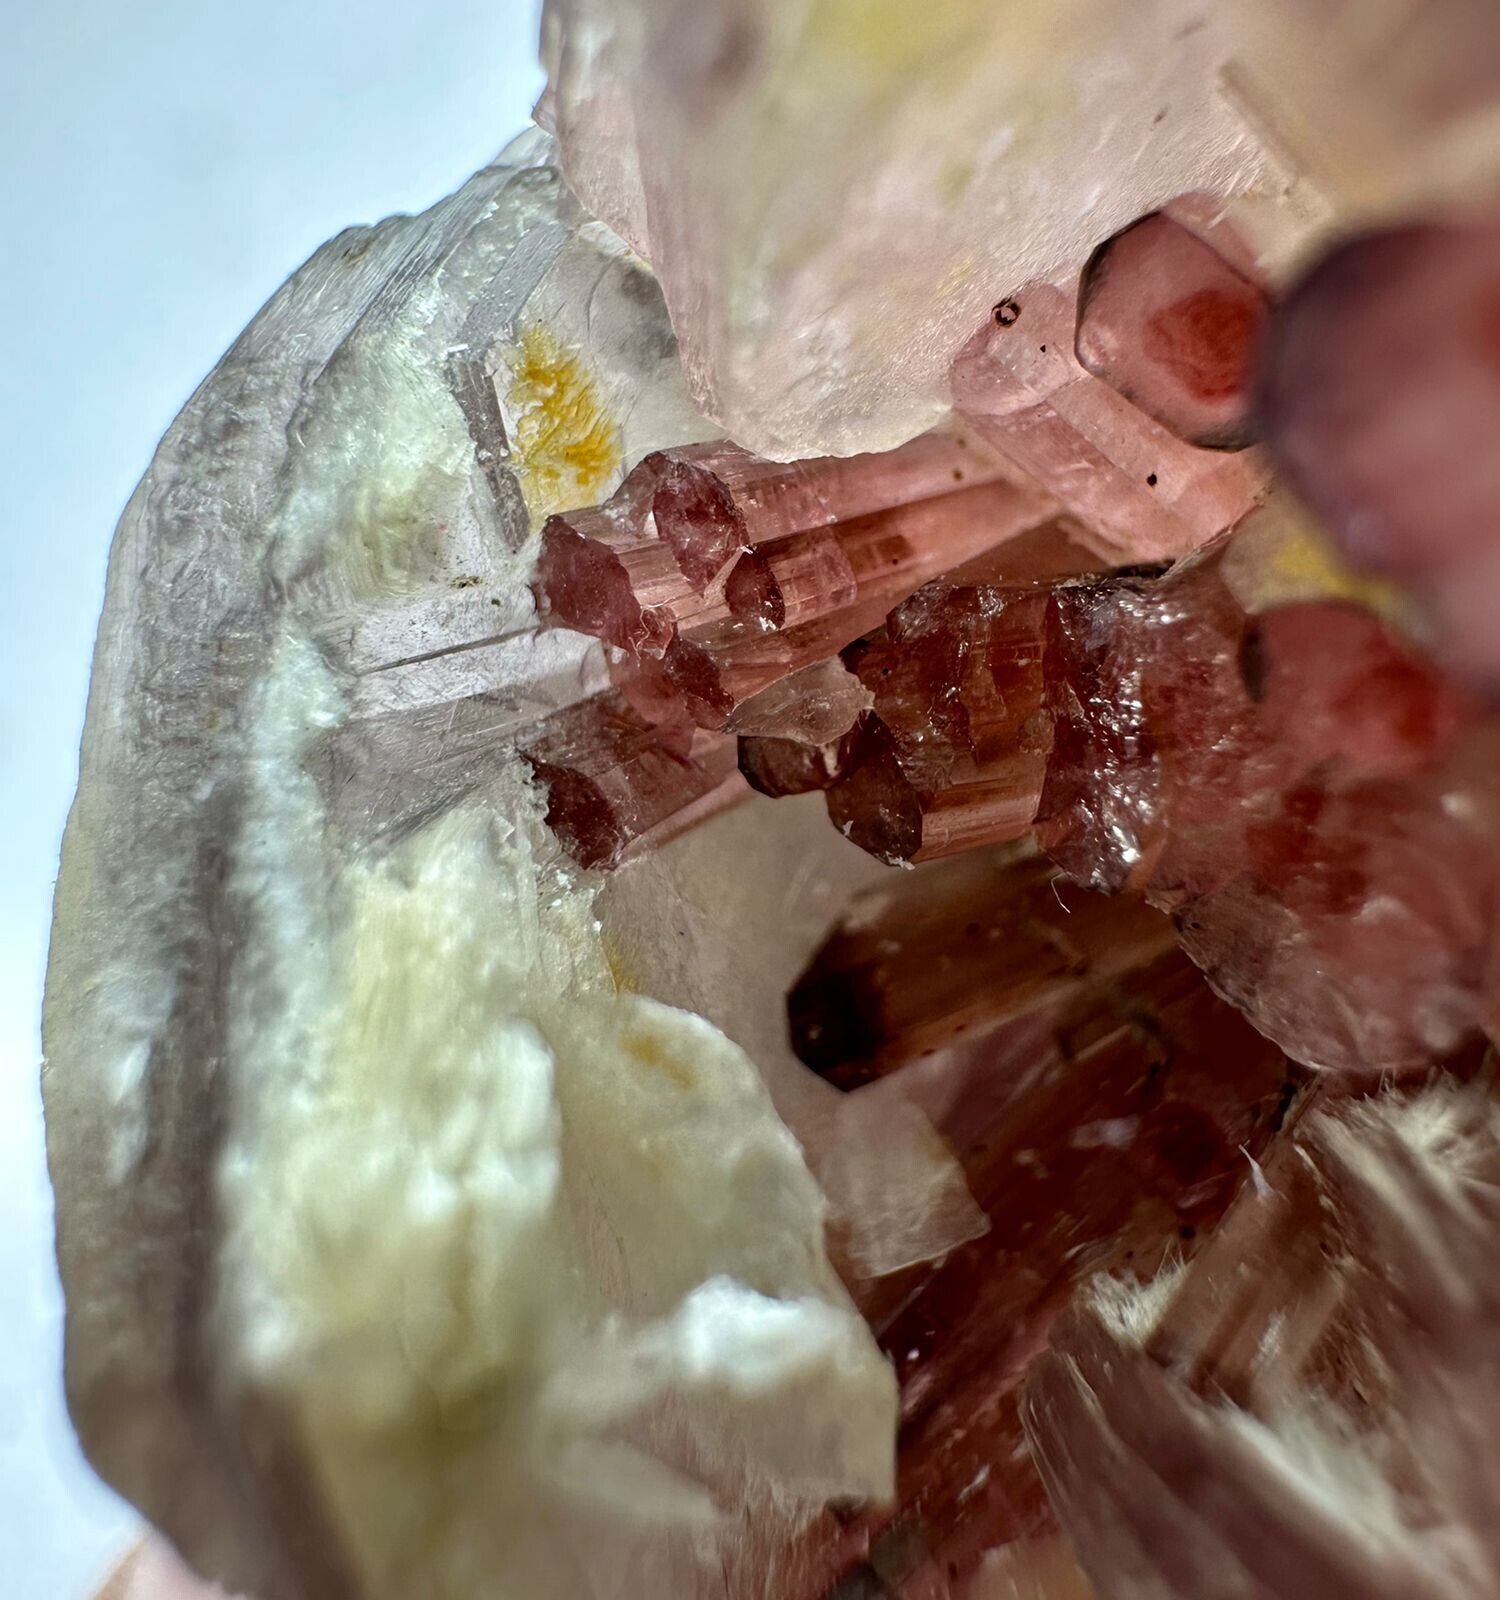 209Ct Full Terminated Rare Quality Pink Tourmaline Crystals On Pinkish Mica @afg